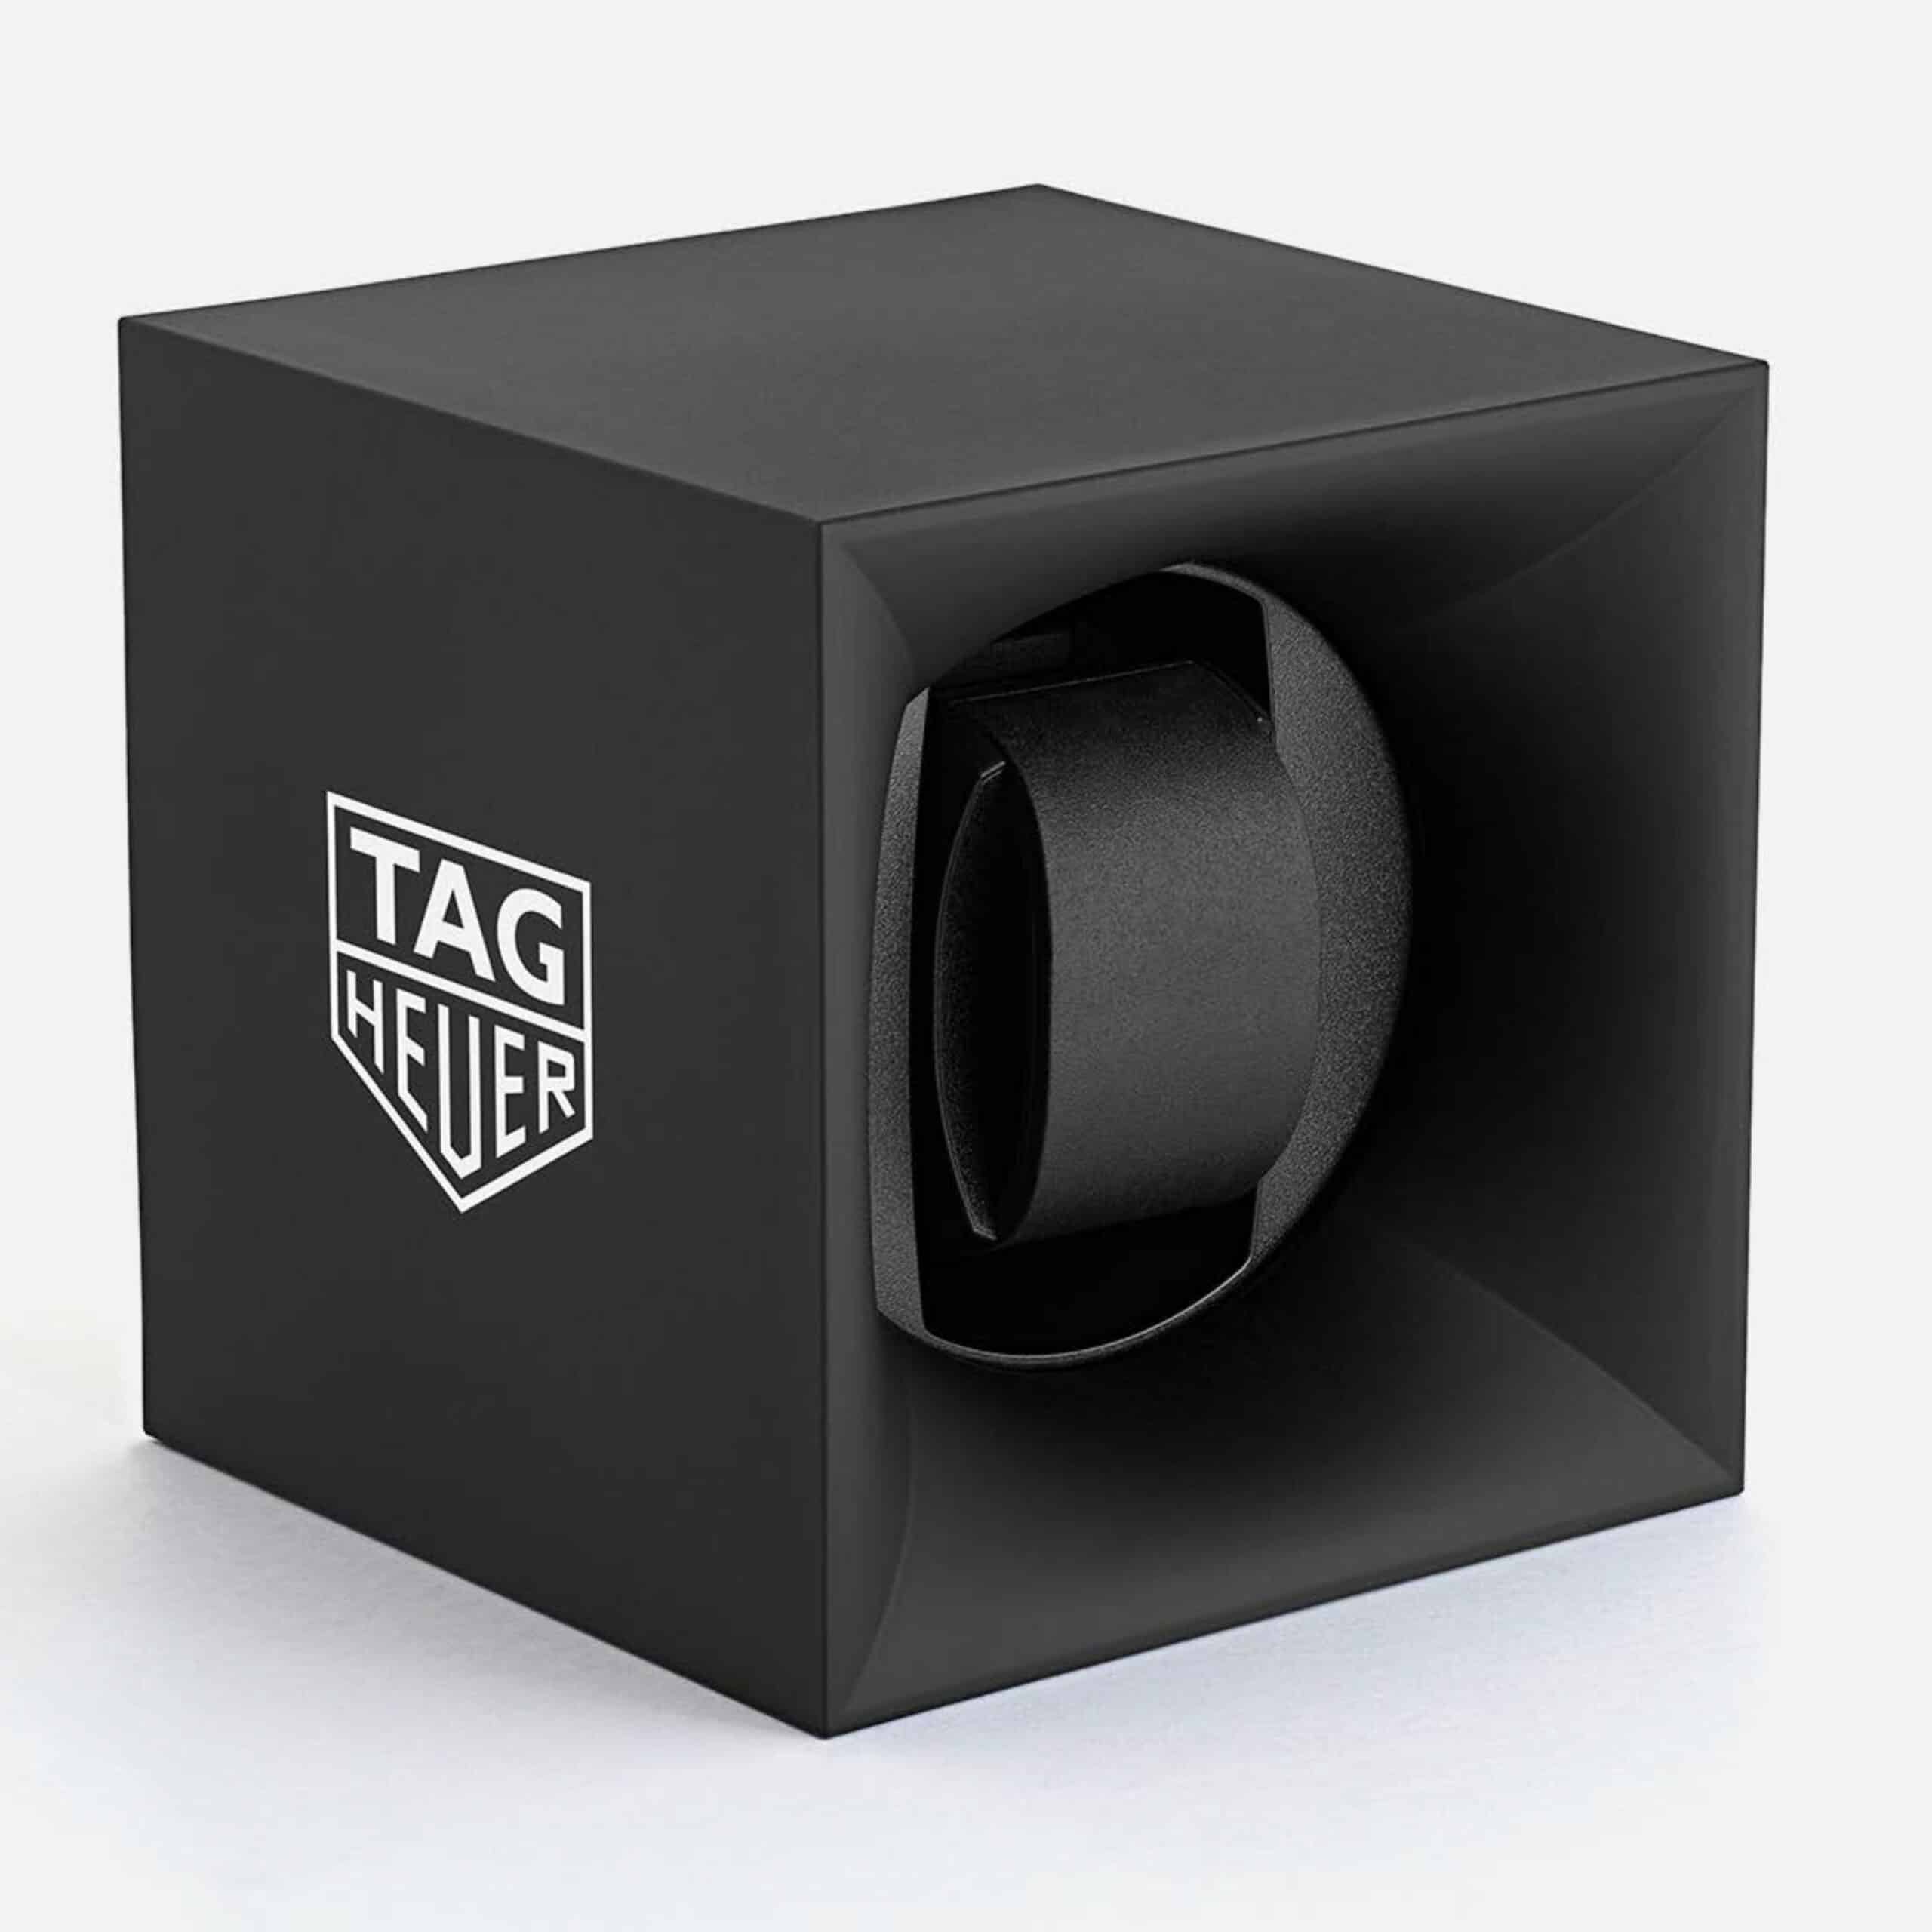 STARTBOX FOR TAG HEUER